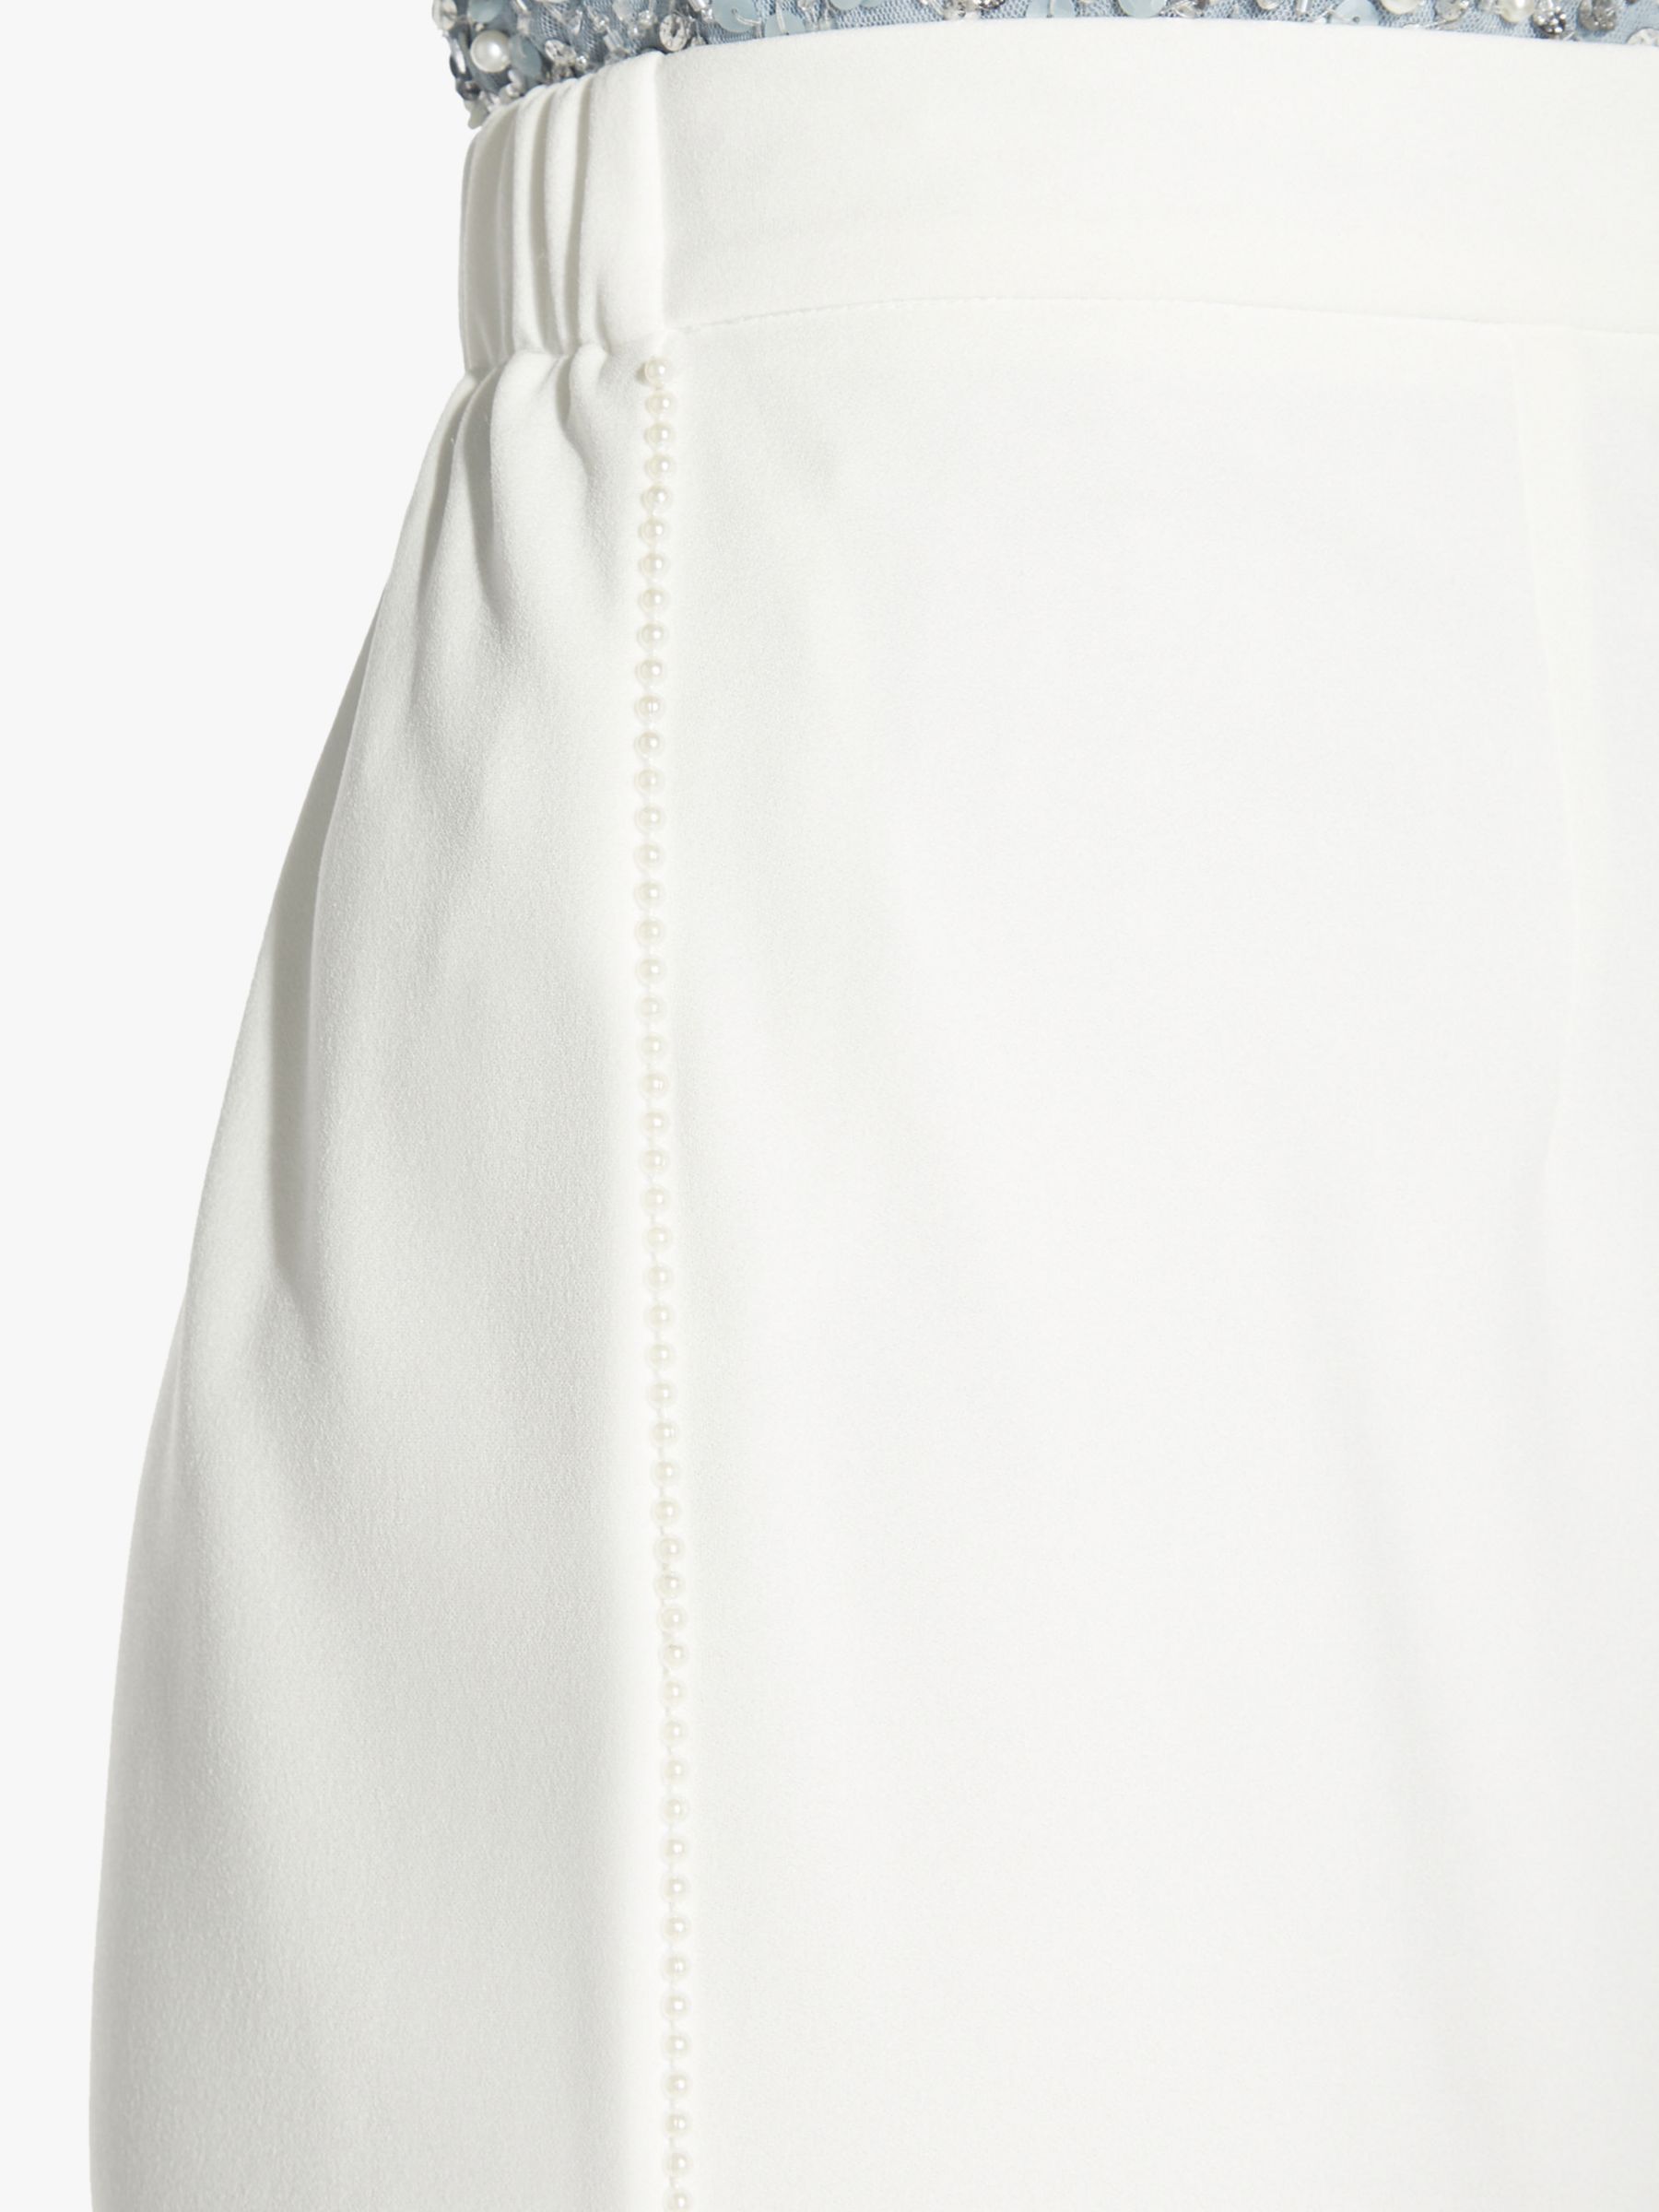 Adrianna Papell Pearl Maxi Skirt, Ivory at John Lewis & Partners